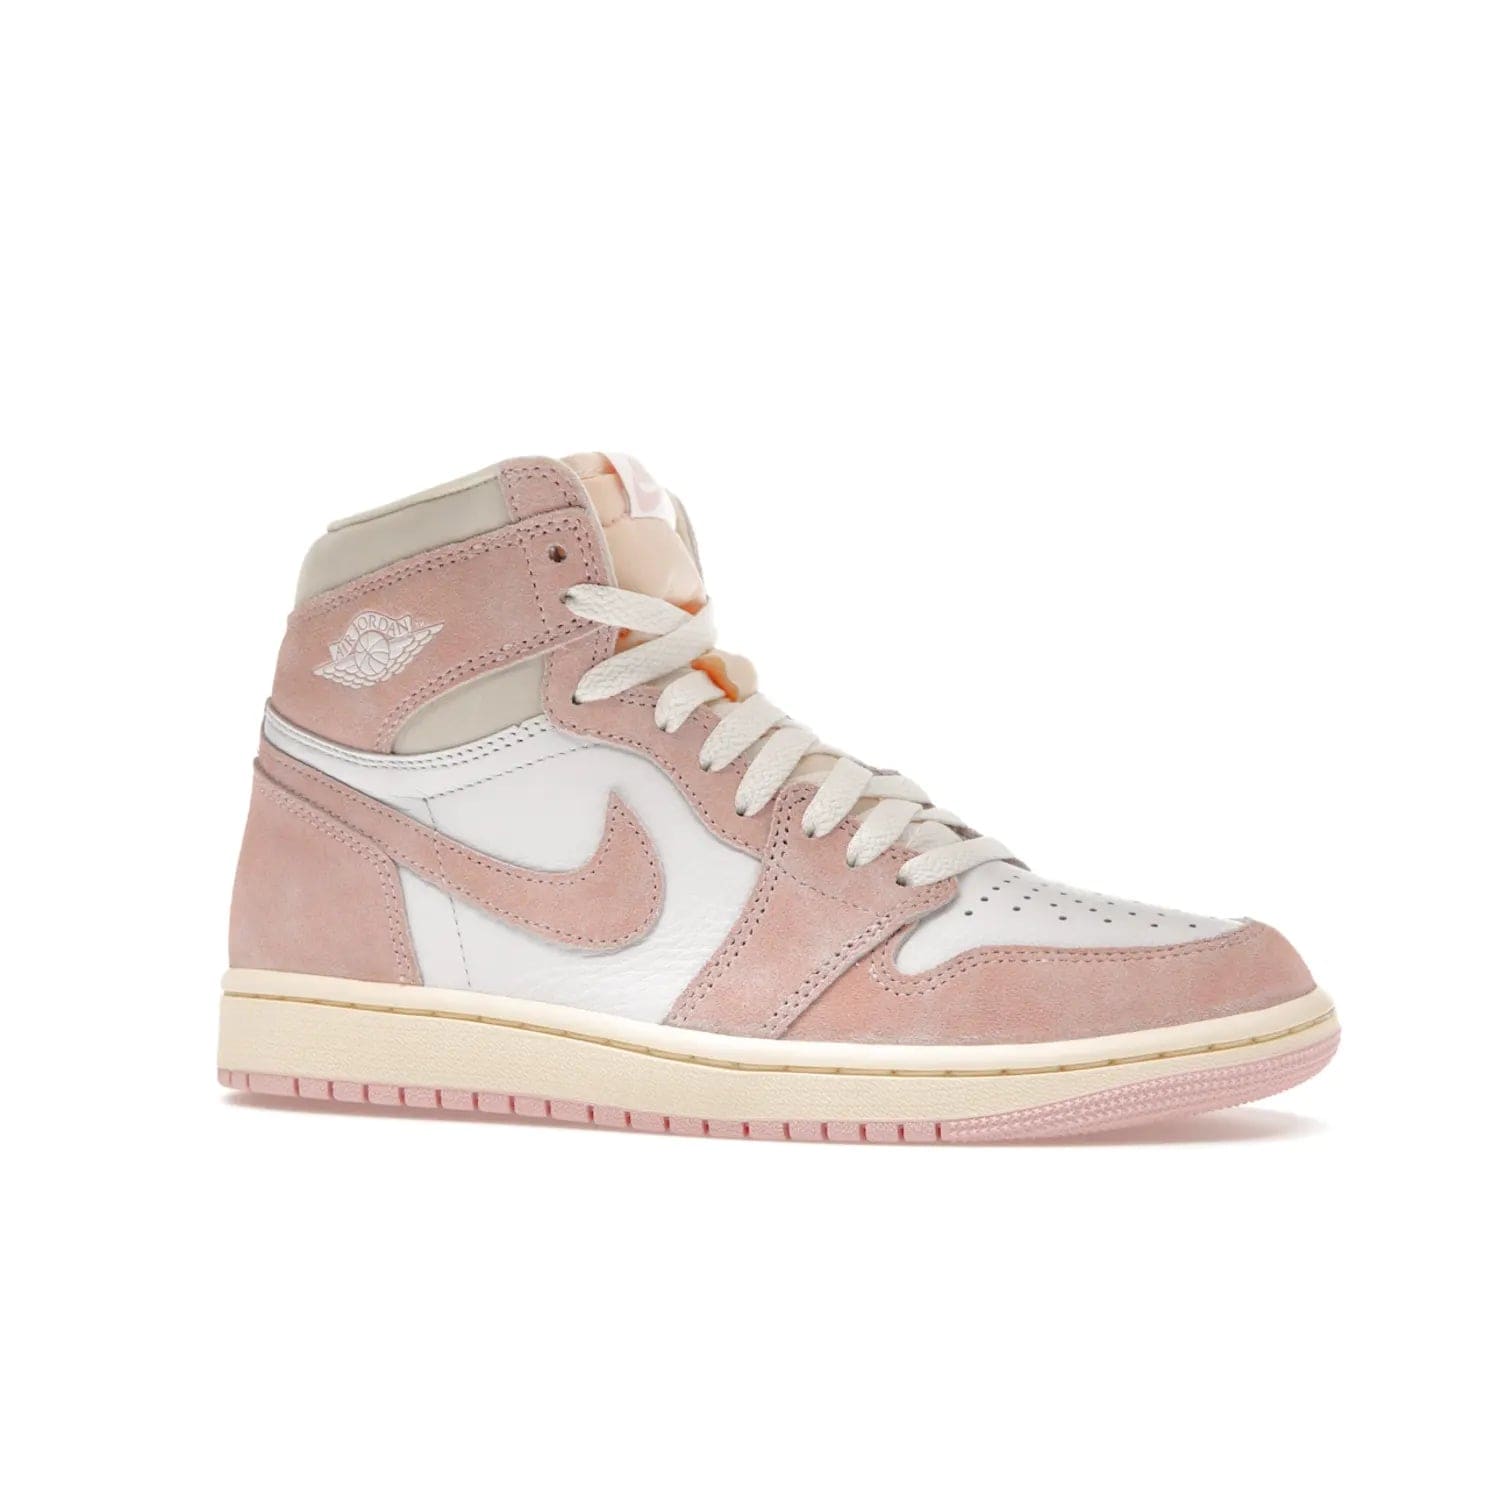 Jordan 1 Retro High OG Washed Pink (Women's) - Image 3 - Only at www.BallersClubKickz.com - Iconic Air Jordan 1 Retro High OG for women with unique pink suede and white leather uppers. Get the timeless look on April 22, 2023.